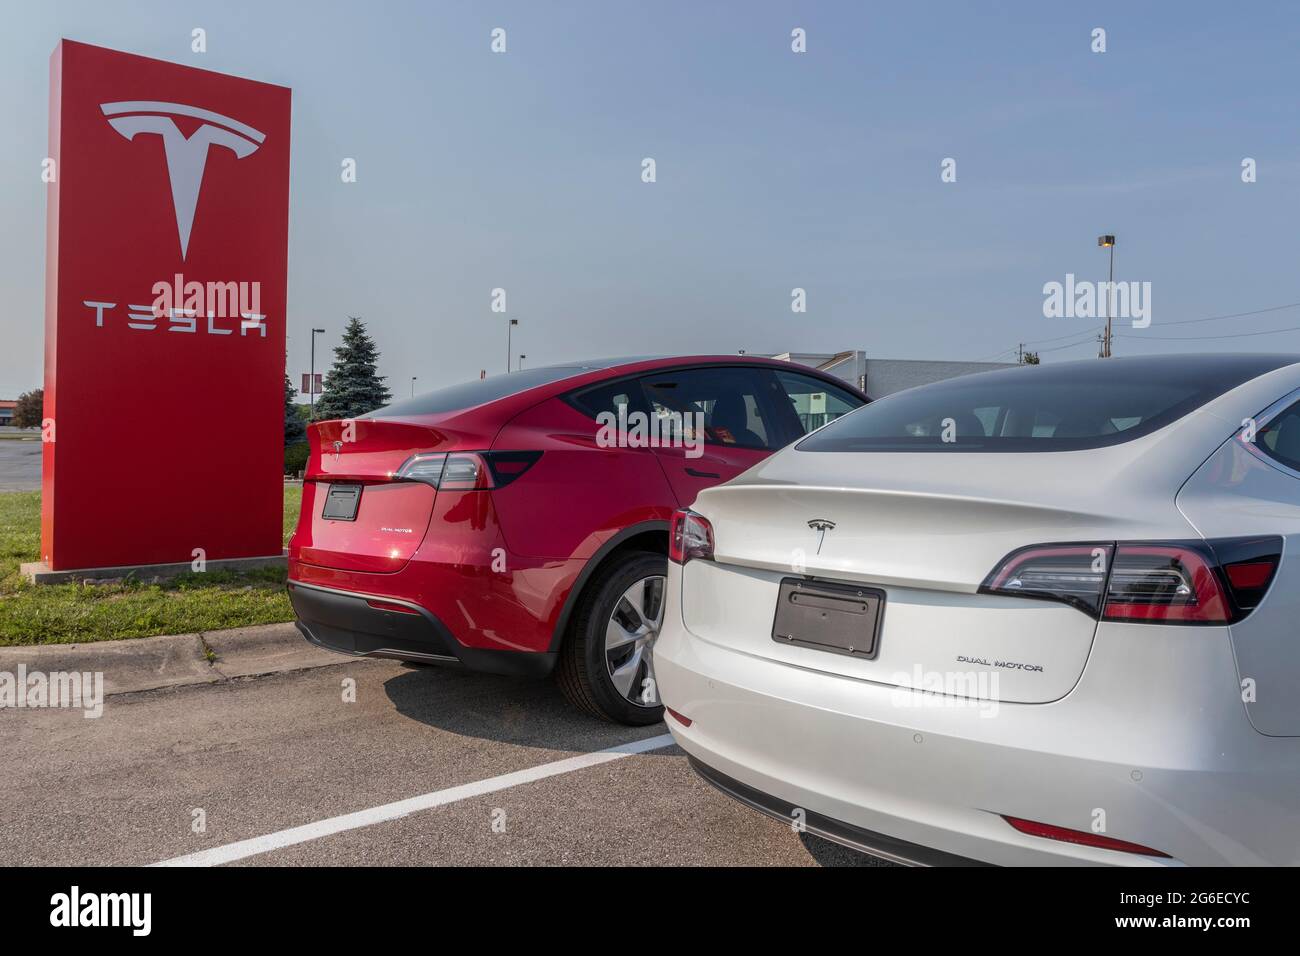 Indianapolis - Circa July 2021: Tesla electric vehicles awaiting preparation for sale. Tesla products include electric cars, battery energy storage an Stock Photo